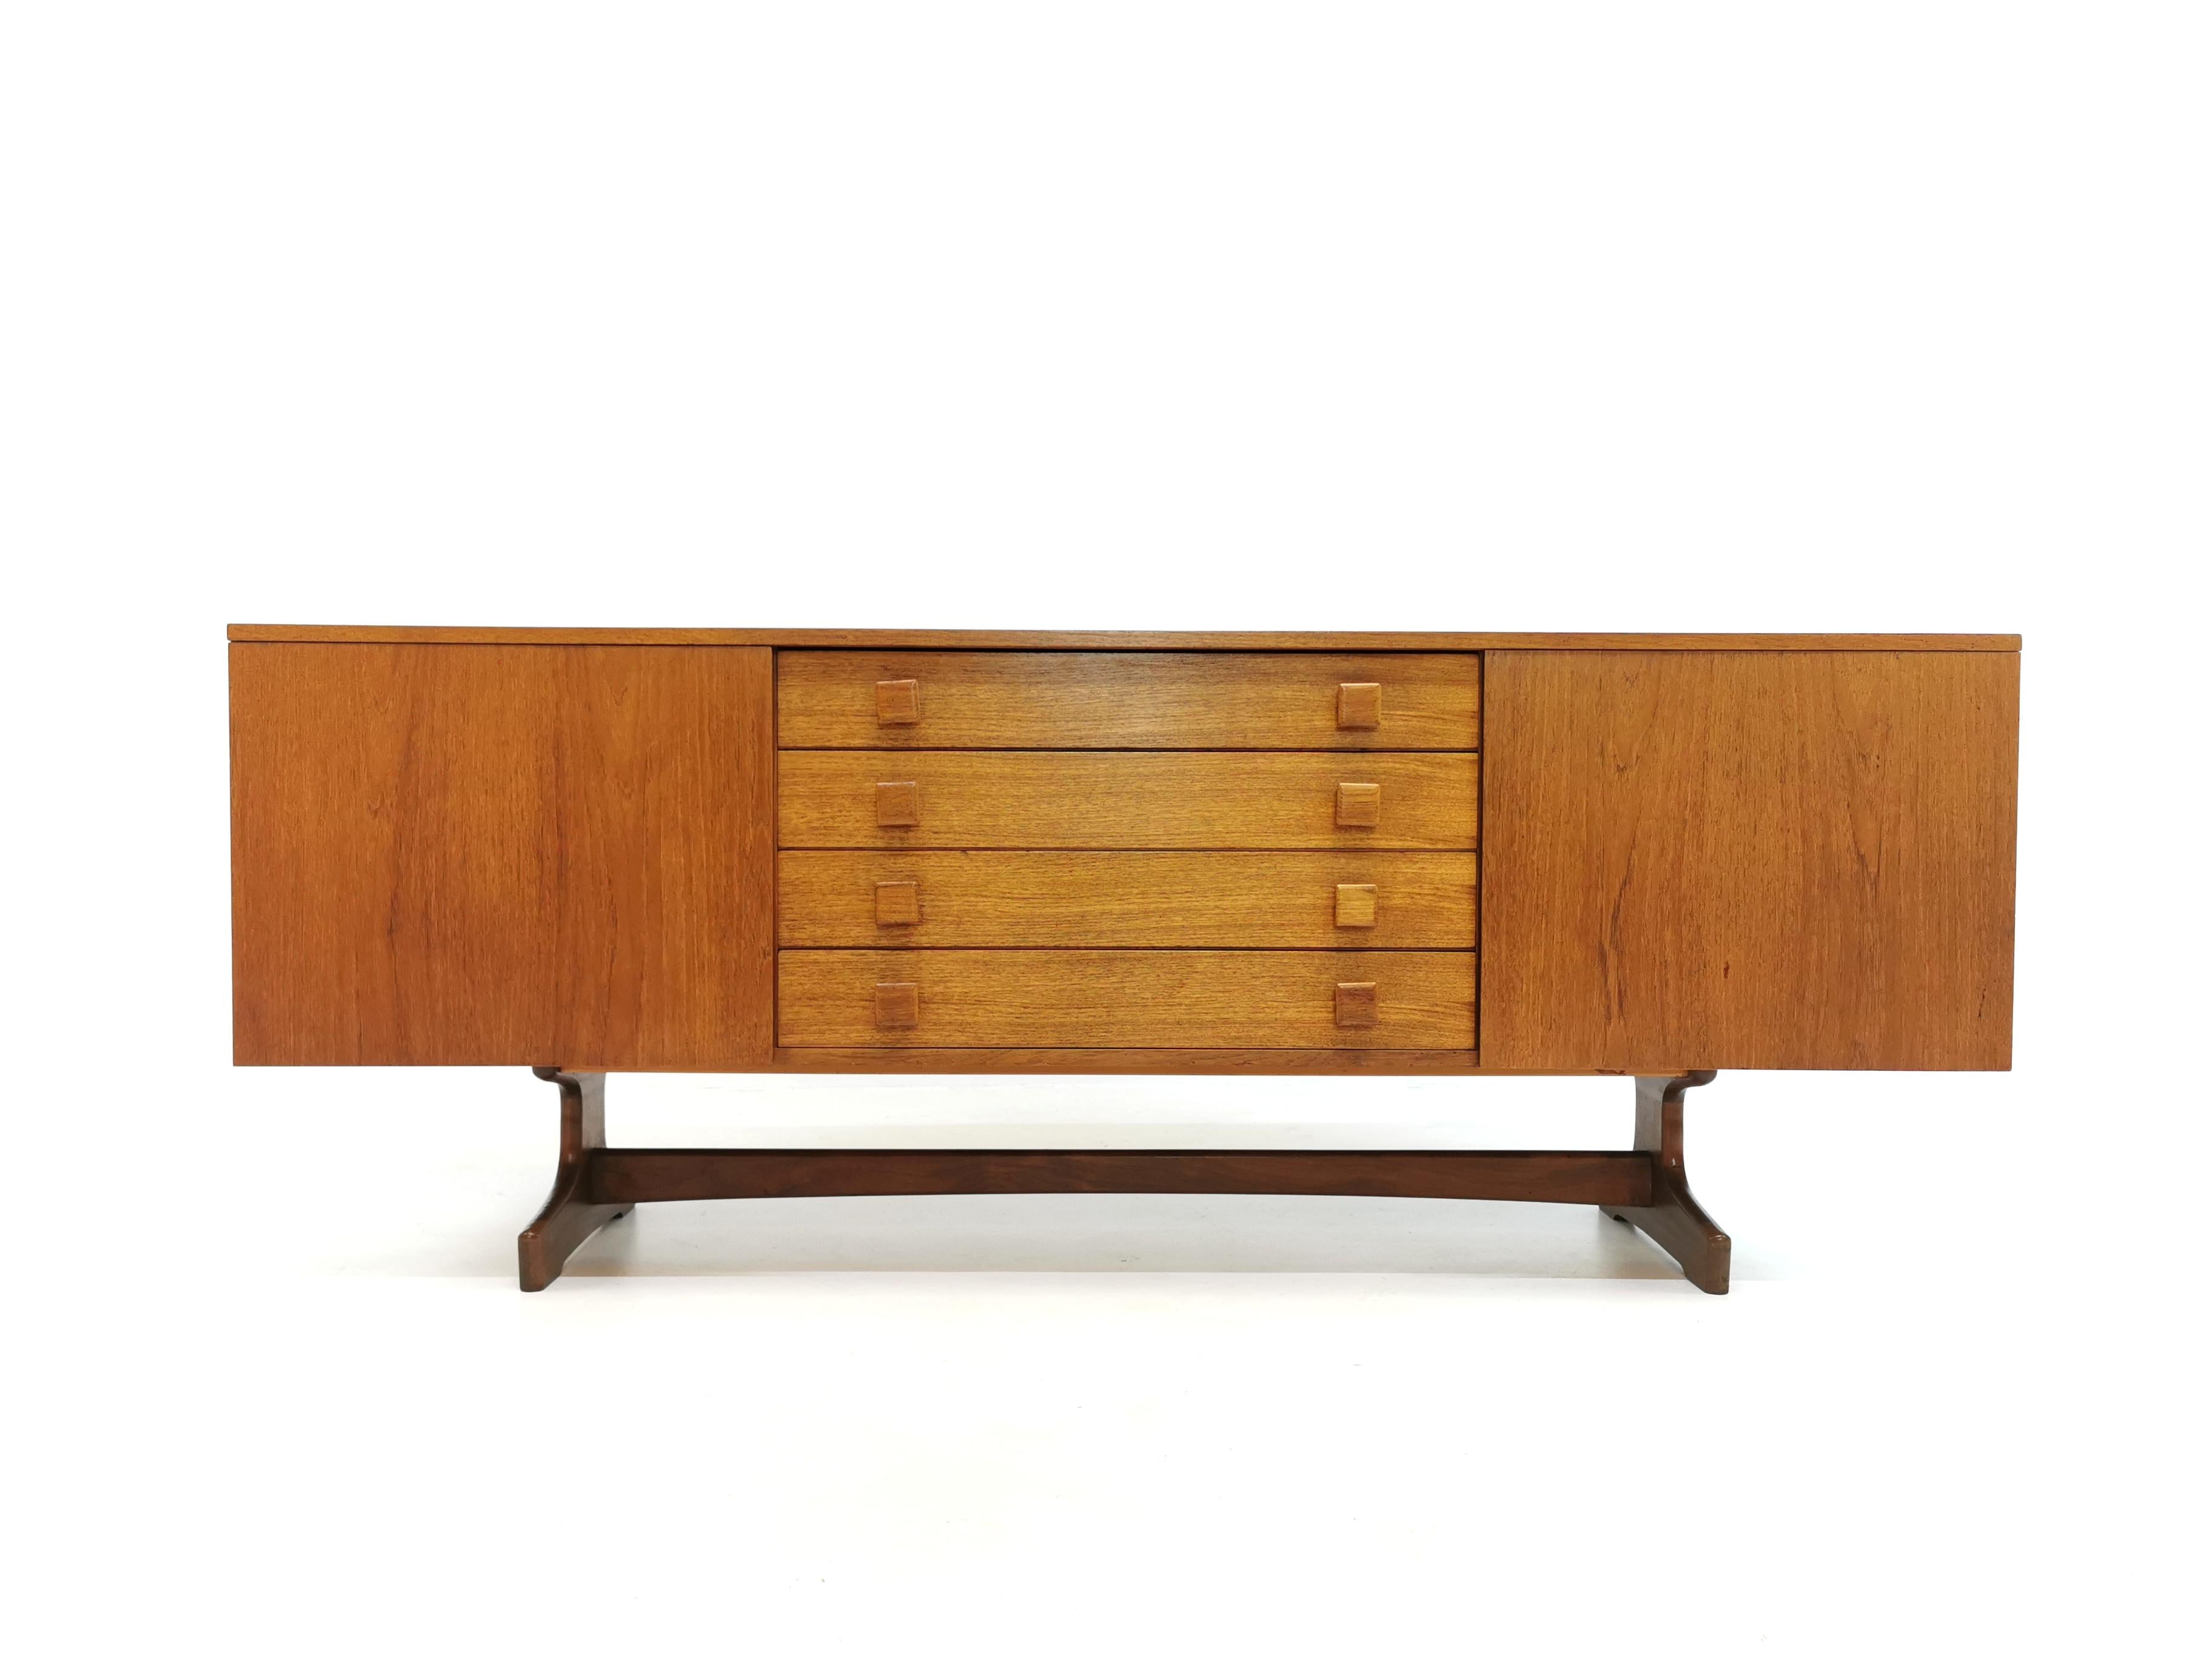 Superb sideboard/credenza designed by Peter Hayward for Vanson. 

Solid dark Afromosia legs. Curved ends. Superb quality and craftsmanship both inside and out. 

Features cupboard space and drawers.
 